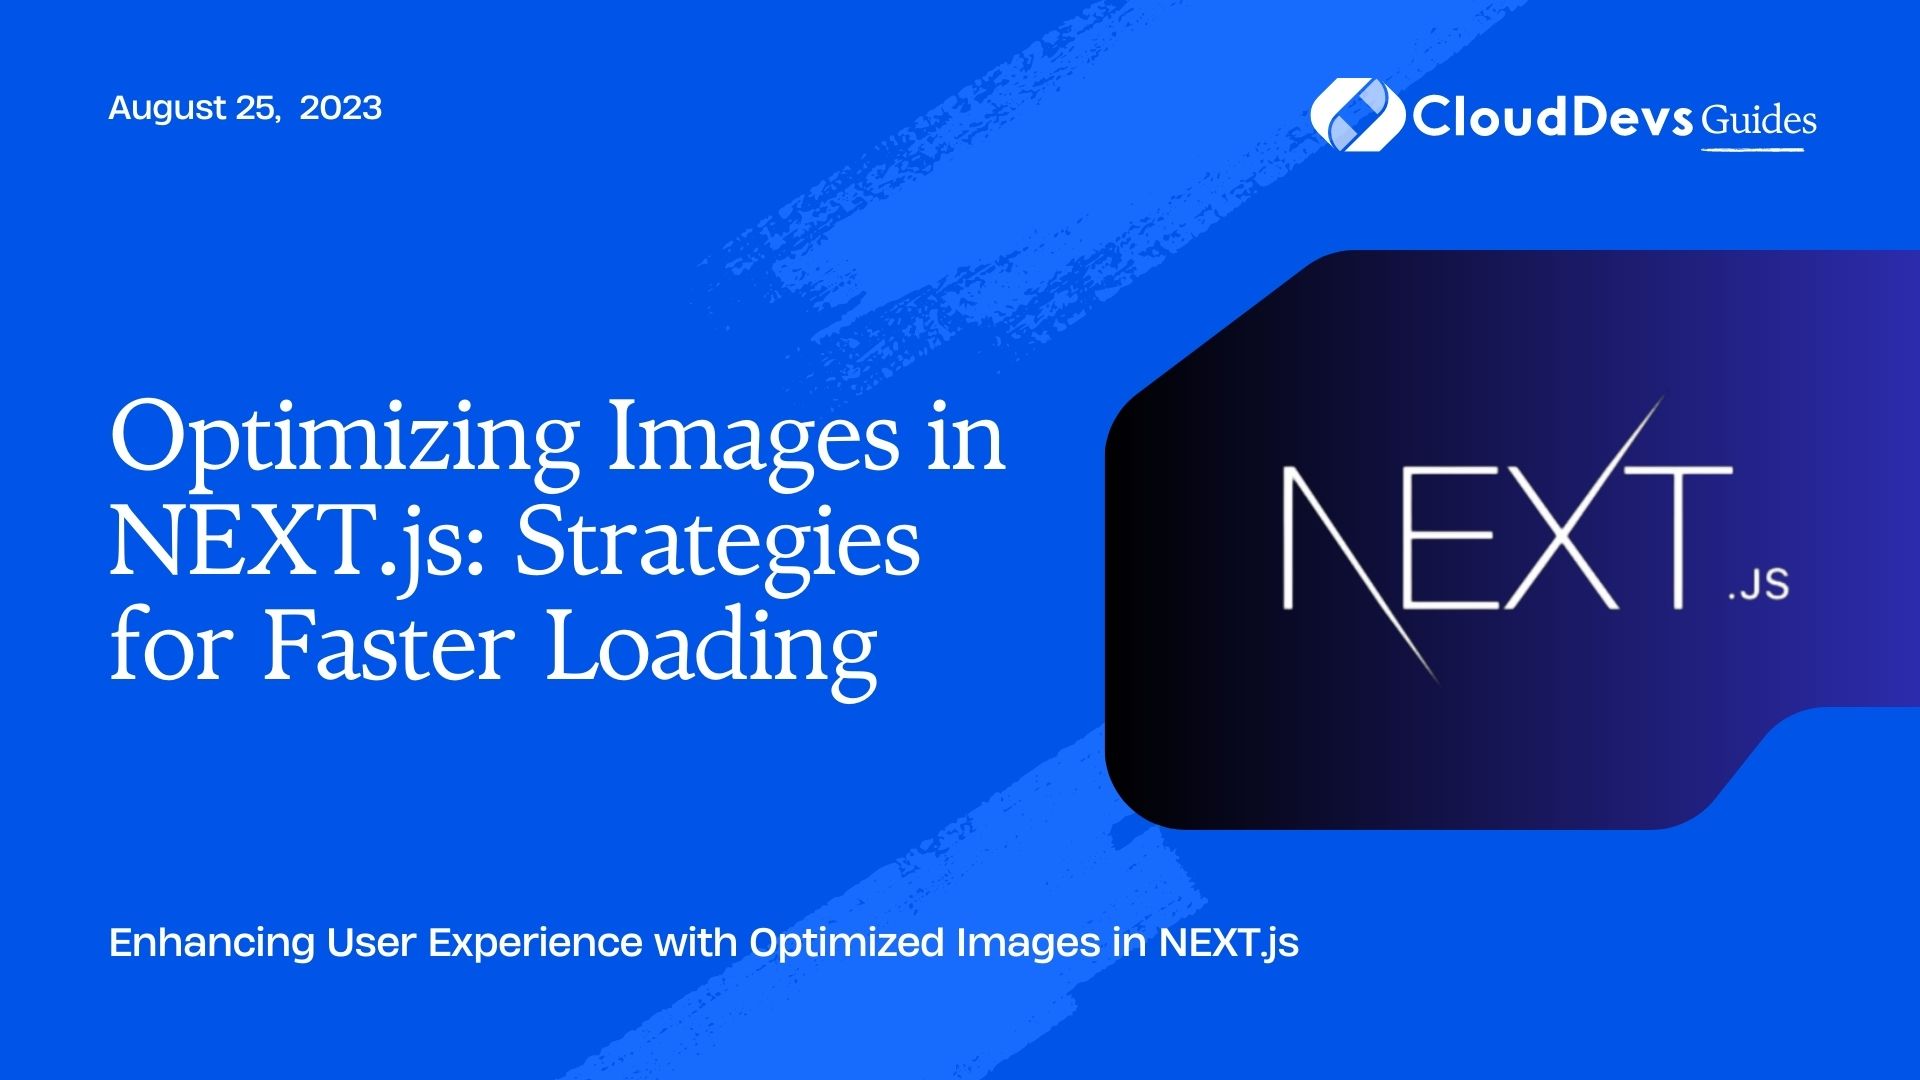 Optimizing Images in NEXT.js: Strategies for Faster Loading